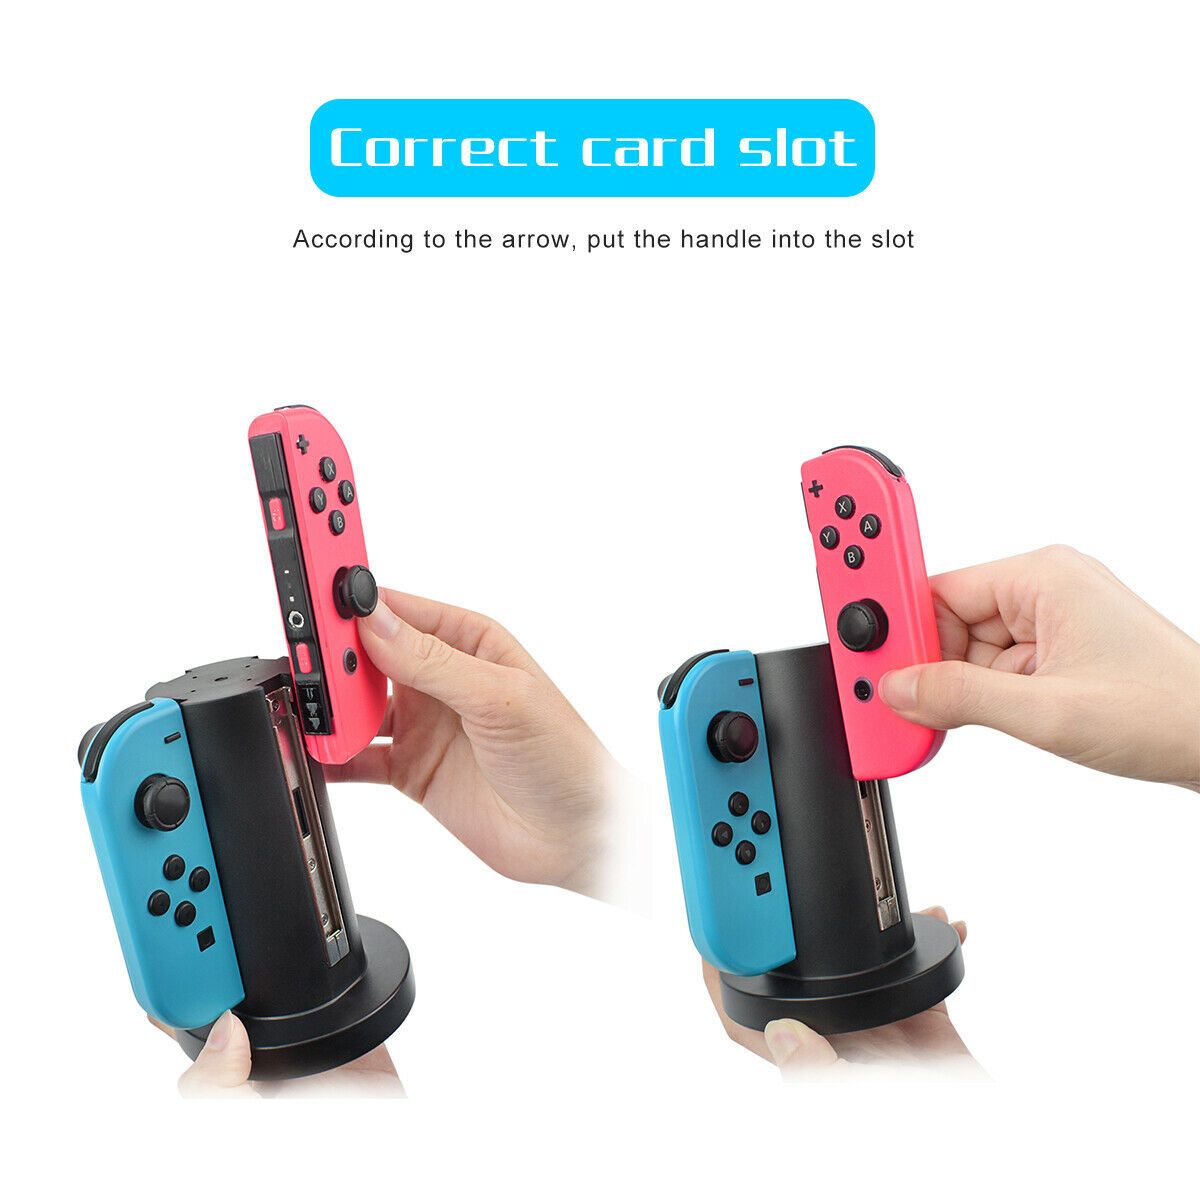 CHARGING STATION JOY/CON SWITCH